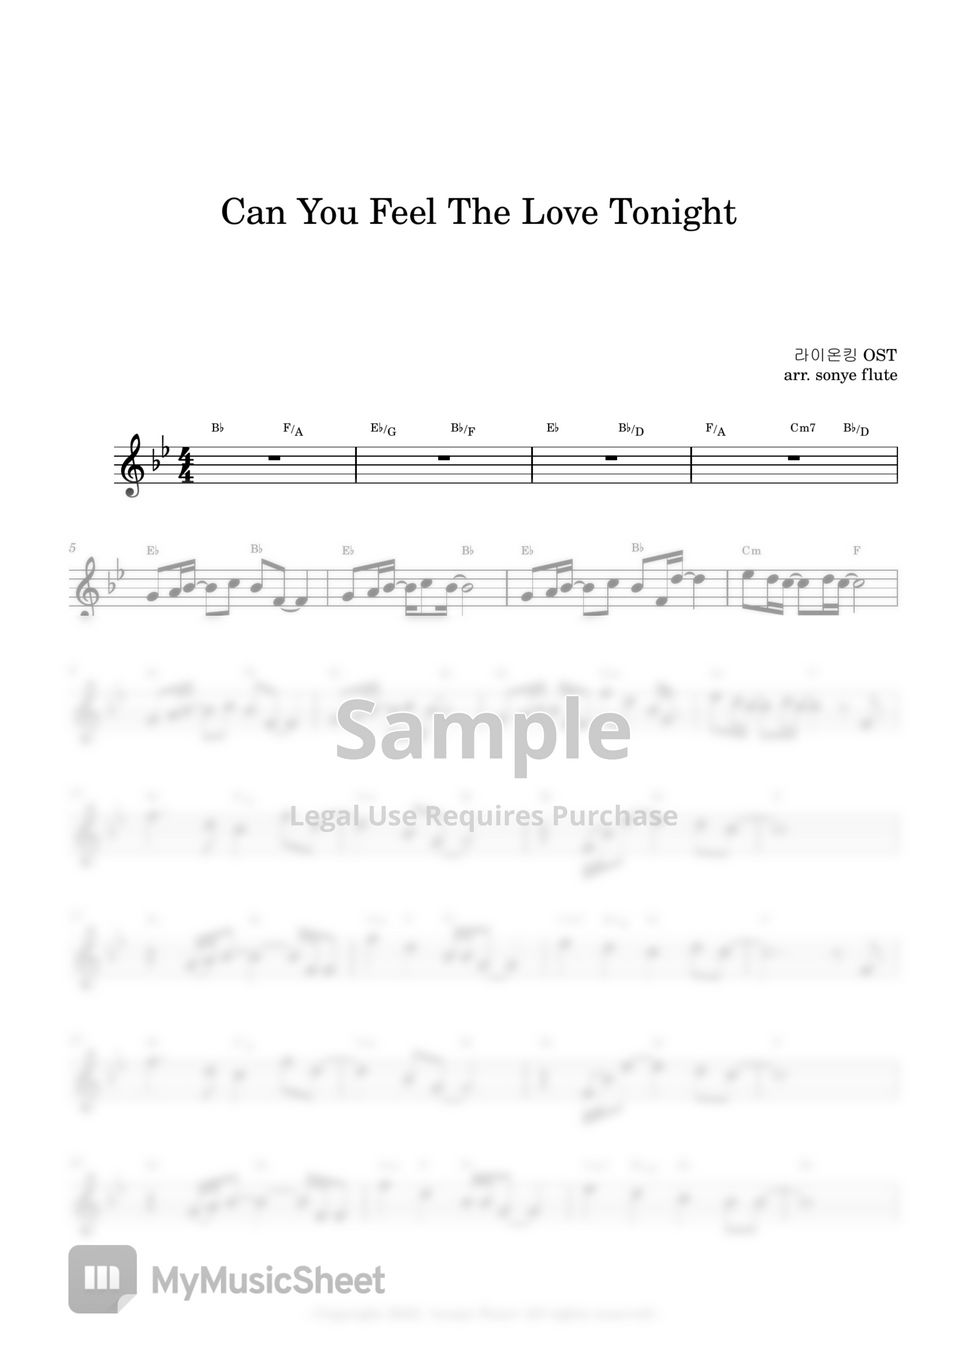 Disney The Lion King OST - Can You Feel The Love Tonight (Flute Sheet Music) by sonye flute